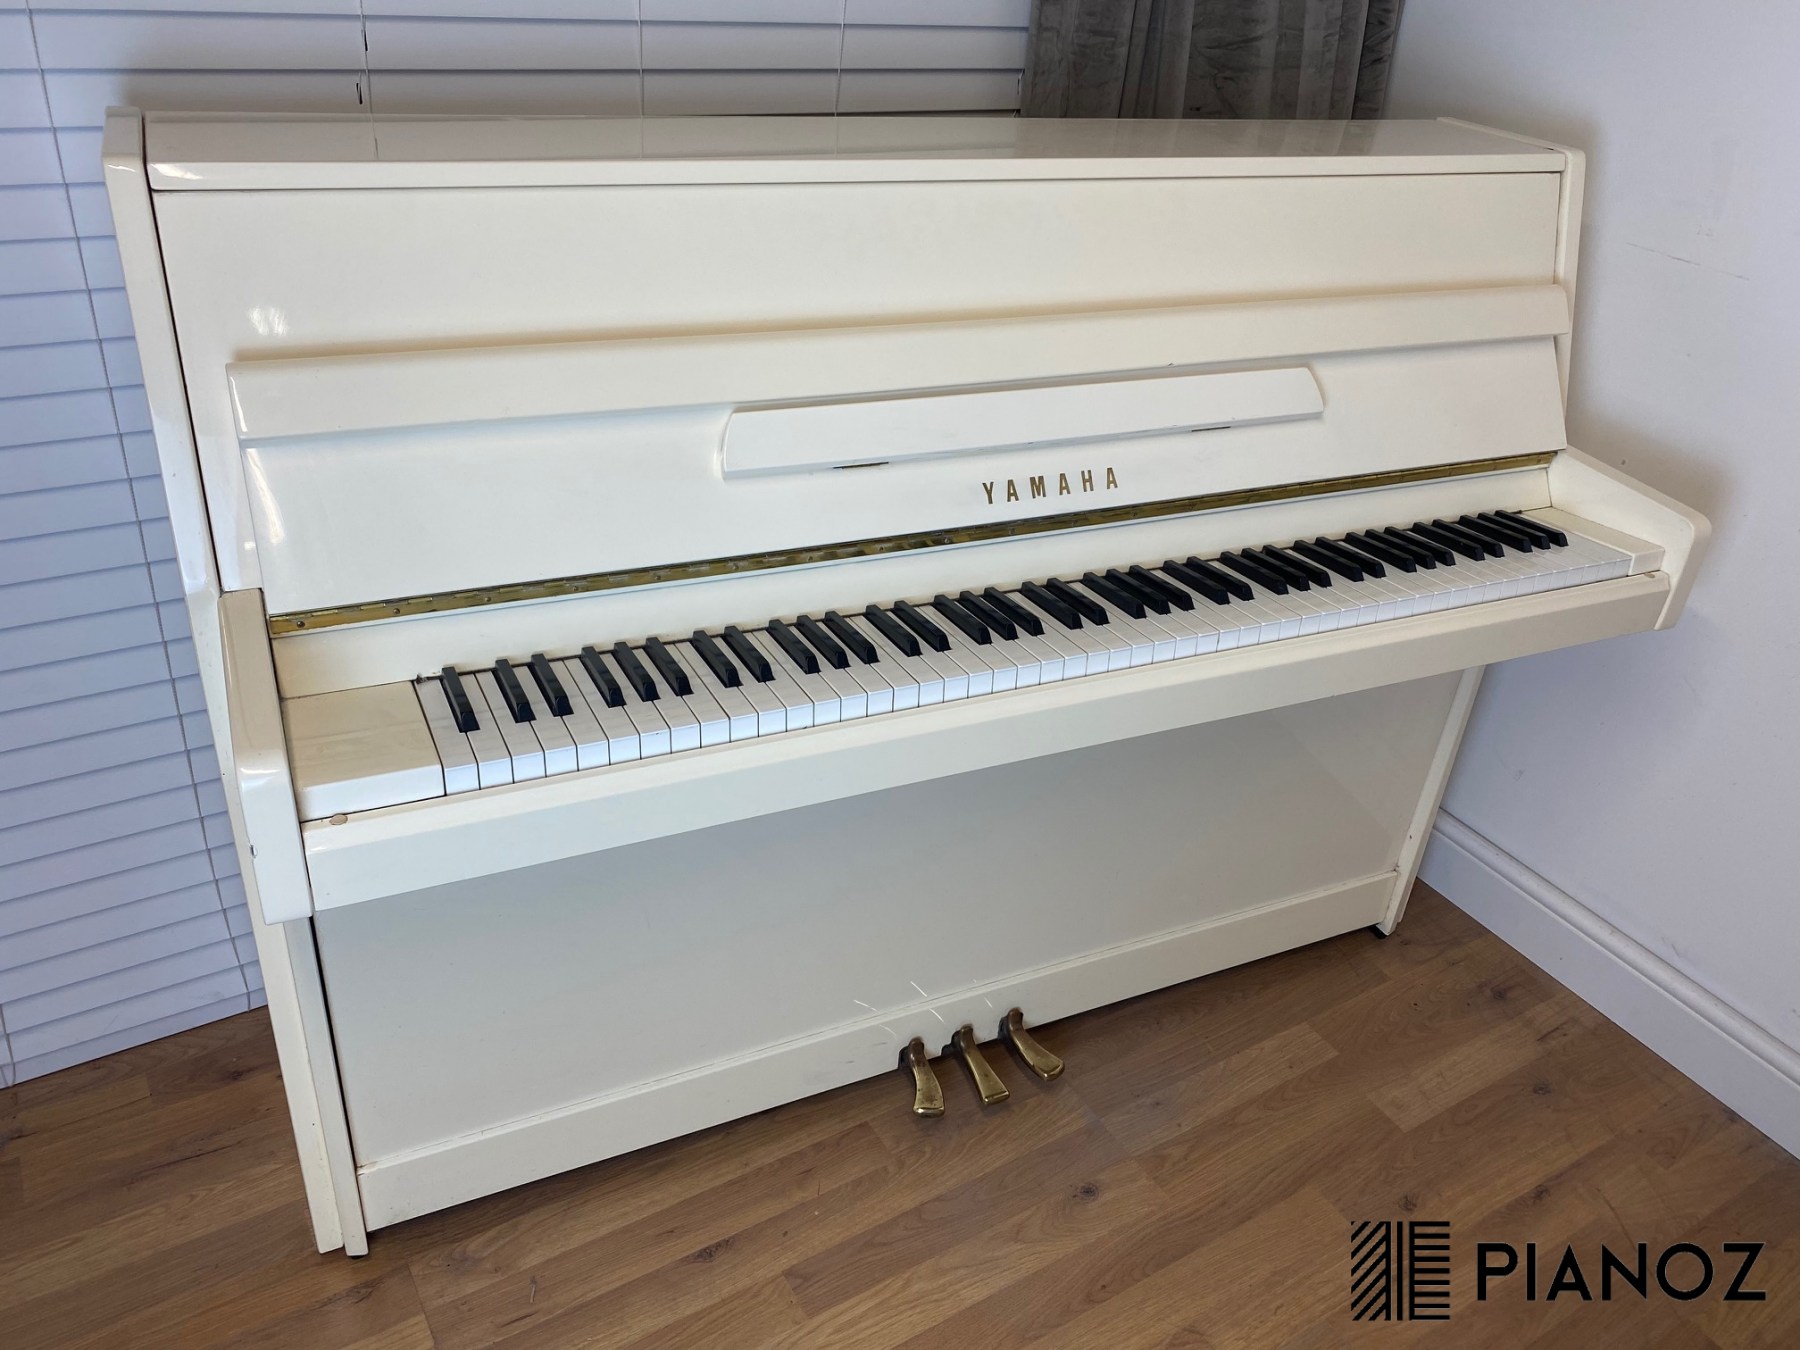 Yamaha M108 White Upright Piano piano for sale in UK